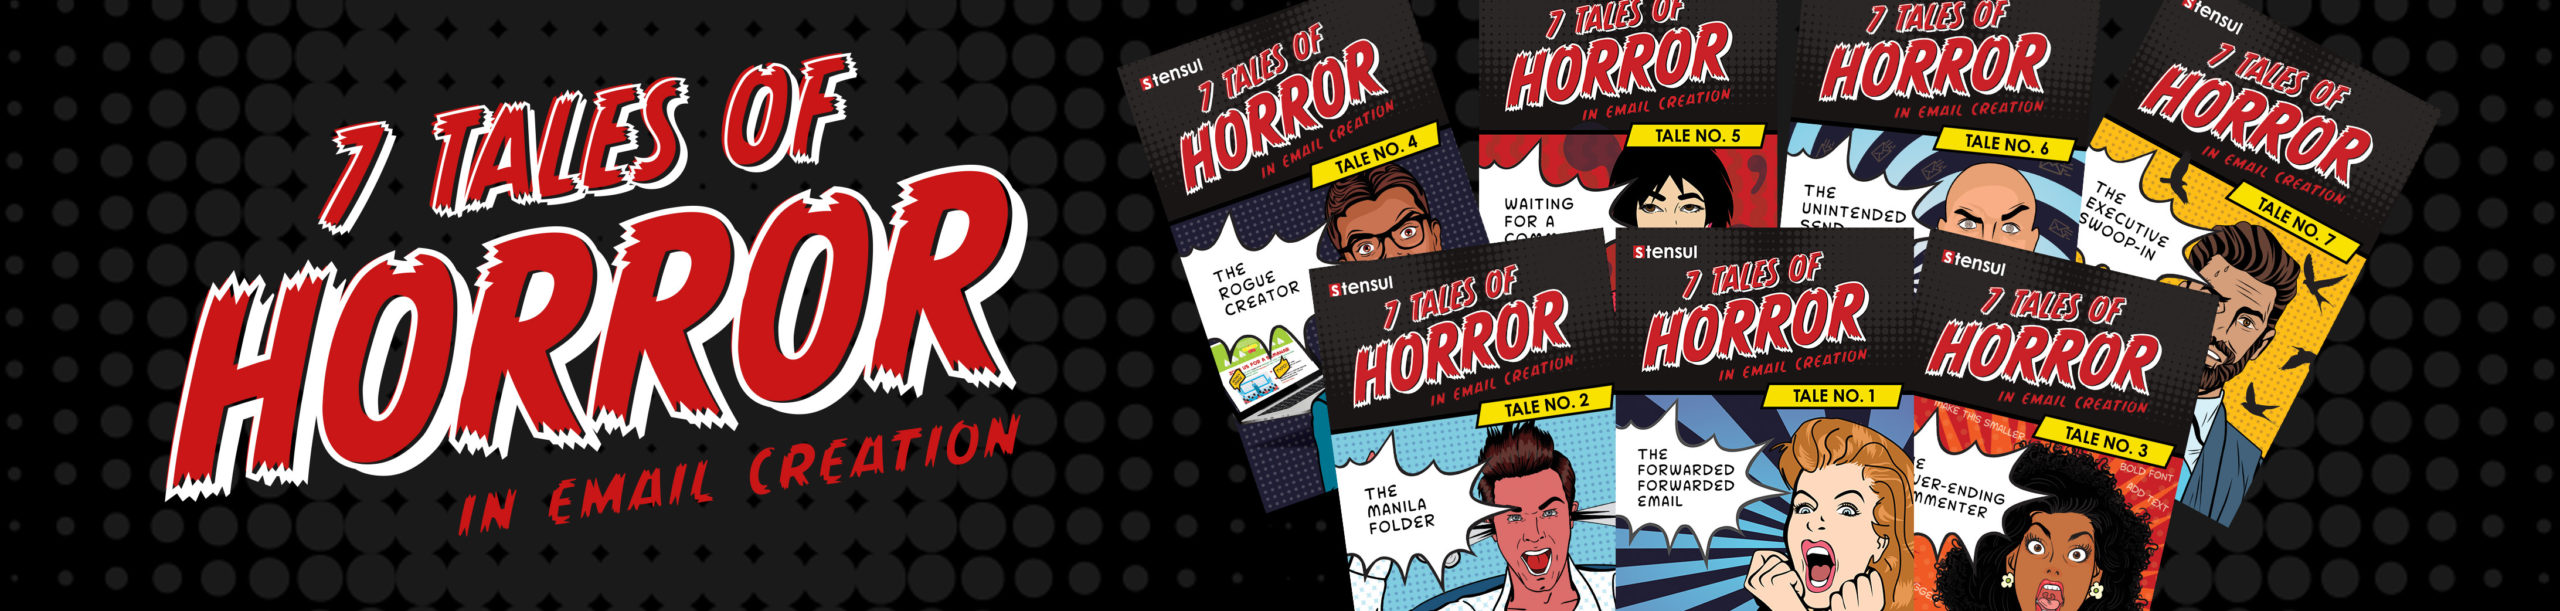 7 Tales of Horror in Email Creation